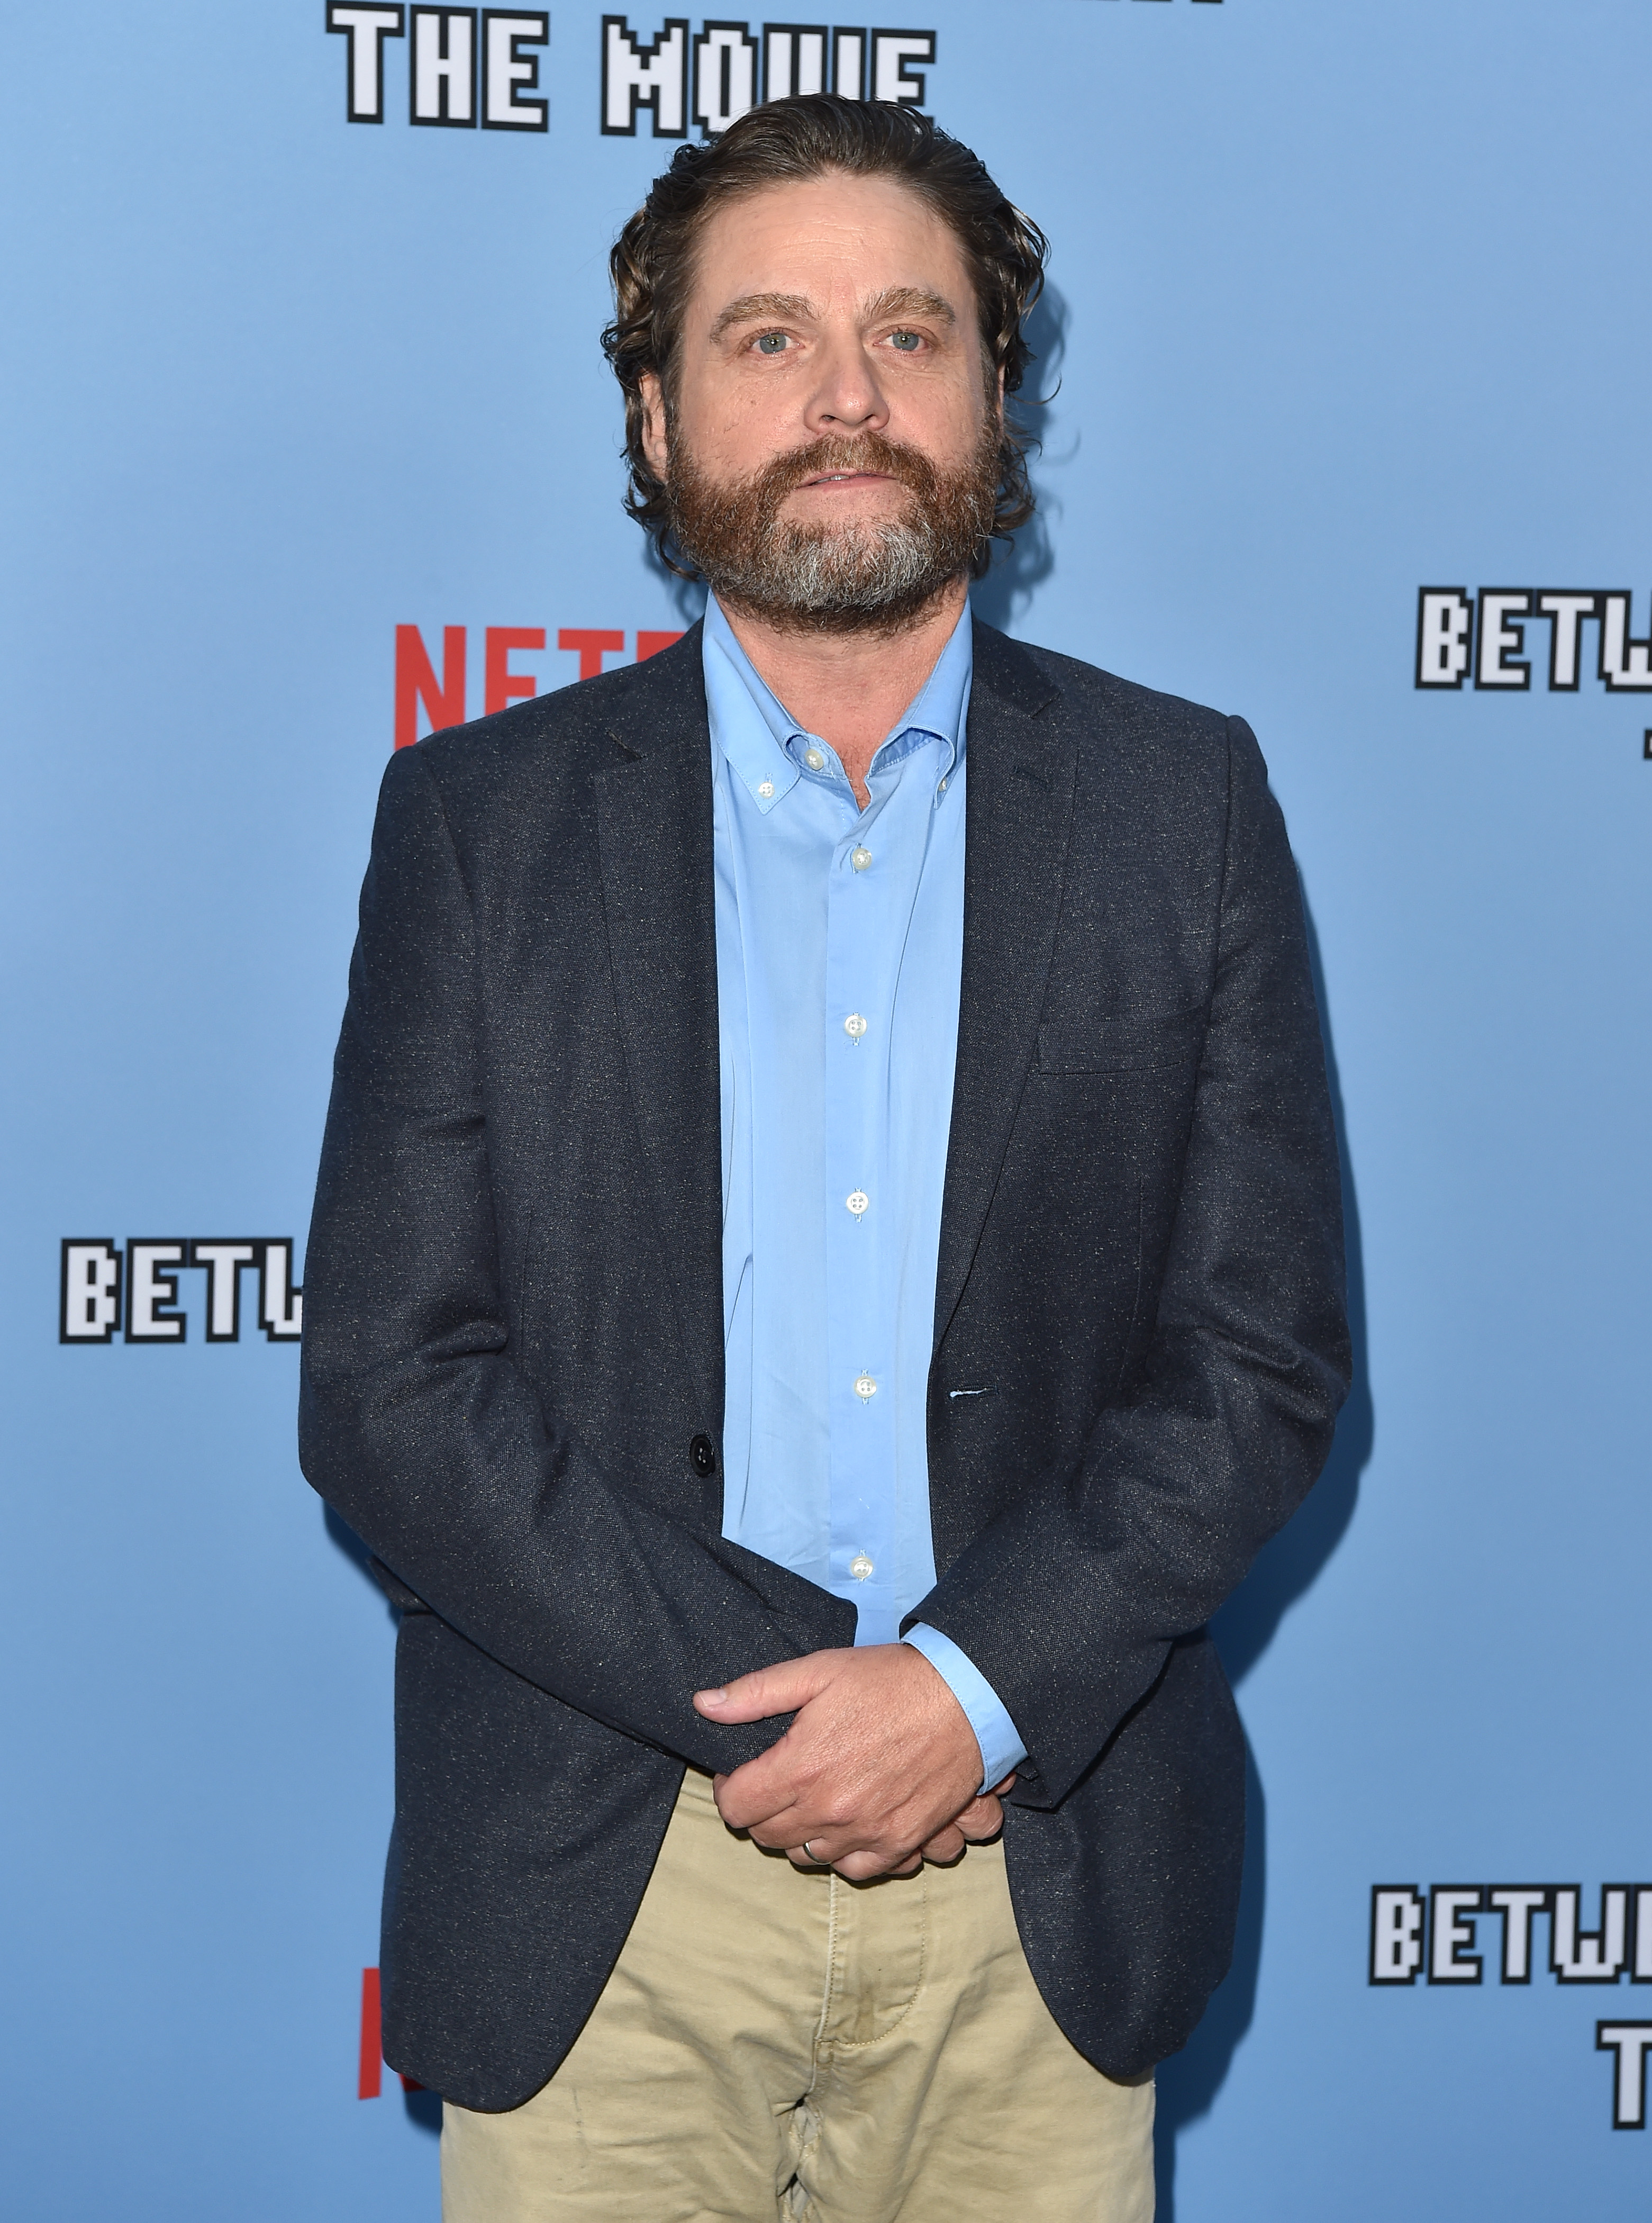 Zach Galifianakis at the LA premiere of "Between Two Ferns: The Movie" in Hollywood, California, on September 16, 2019. | Source: Getty Images